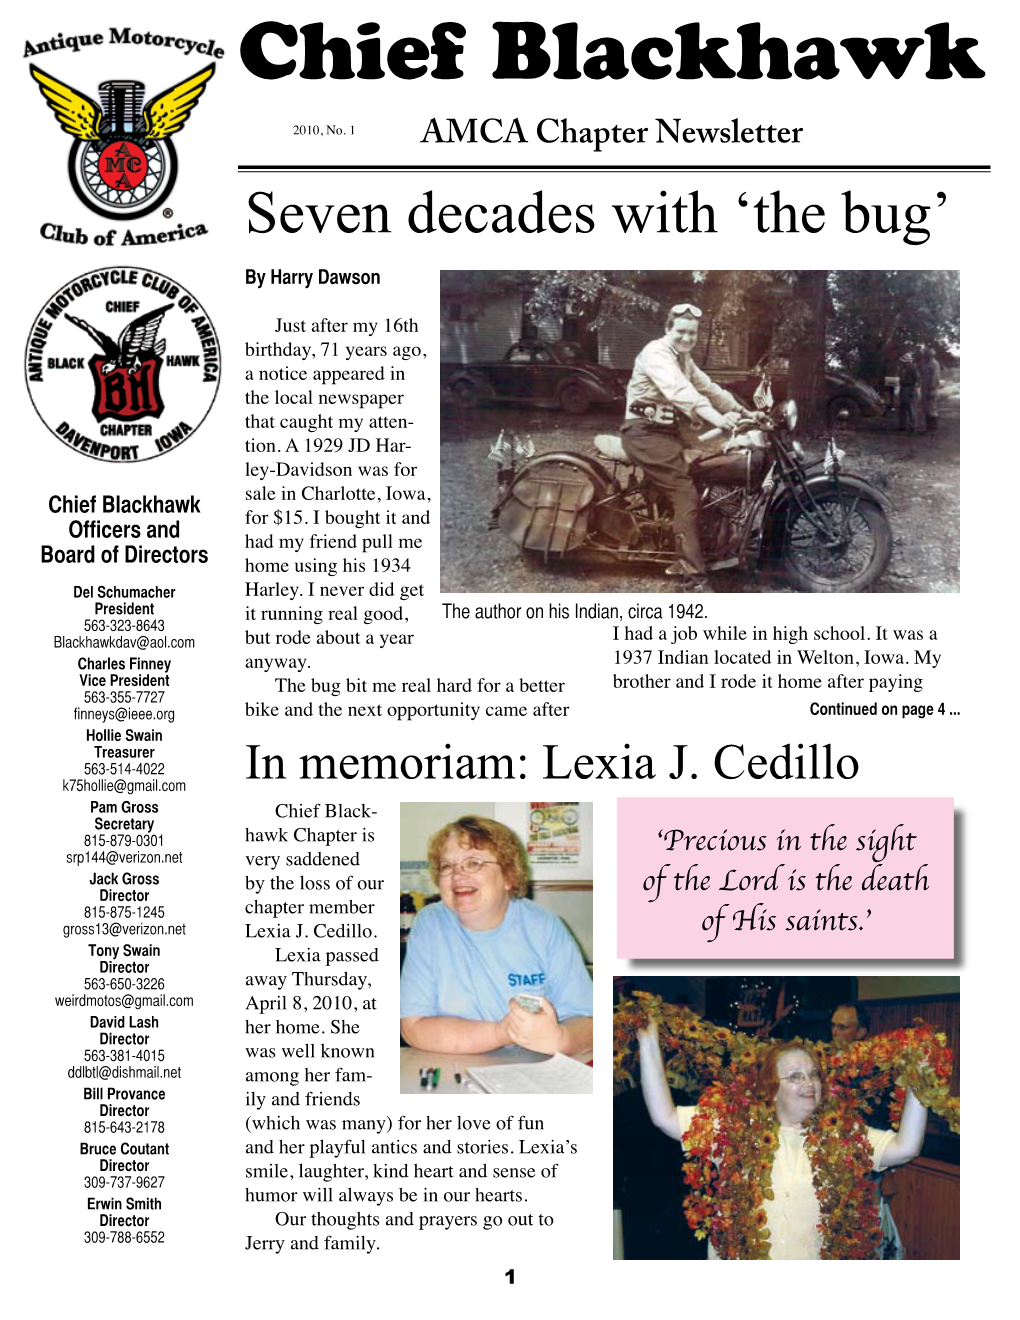 AMCA Chapter Newsletter Seven Decades with ‘The Bug’ by Harry Dawson